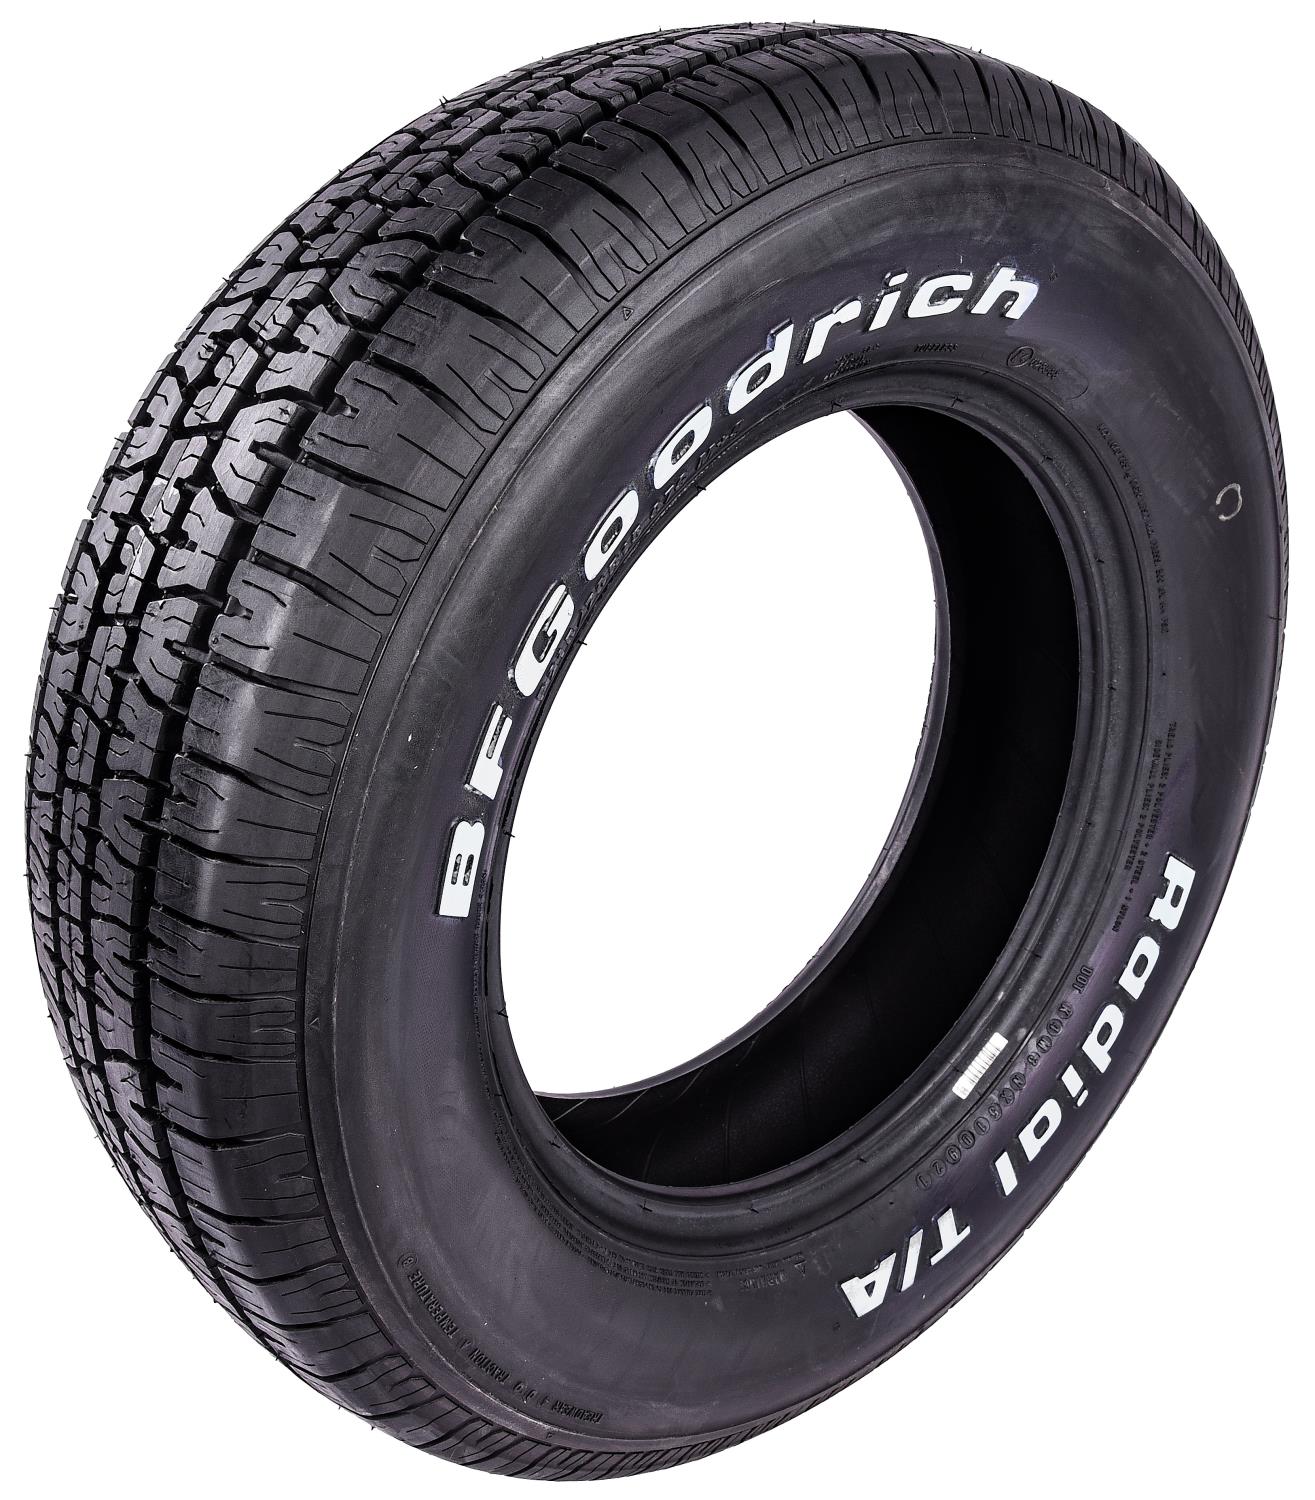 Radial T/A Tire P215/70R15